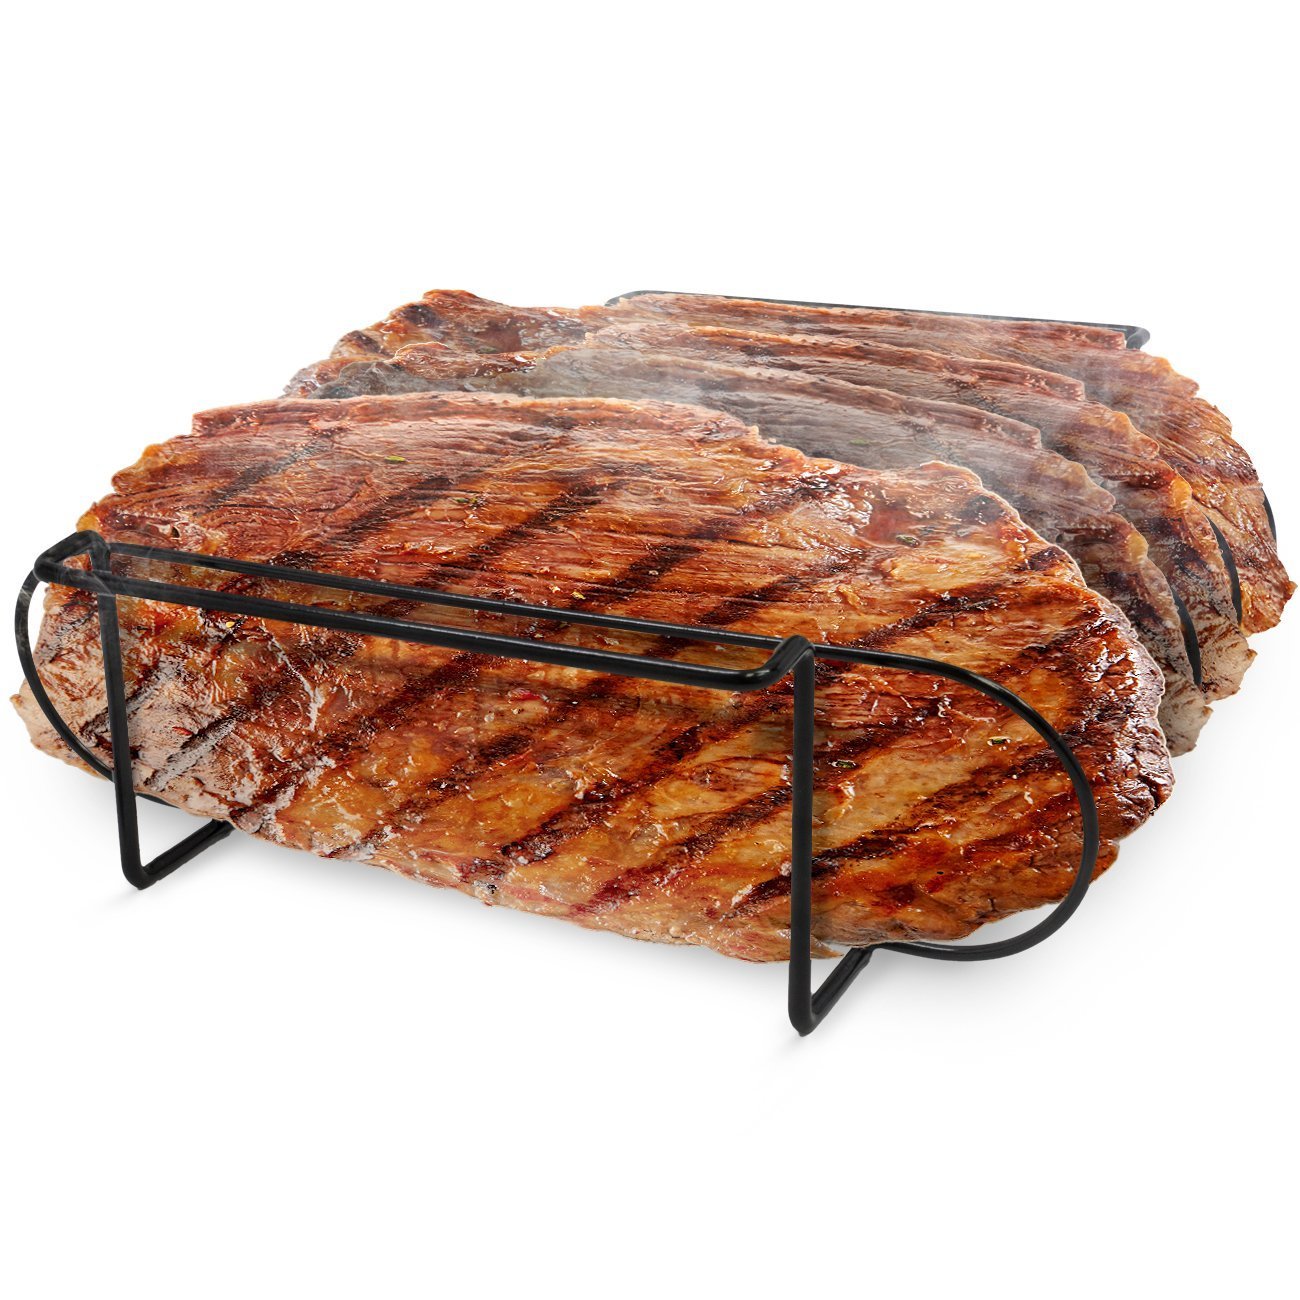 This vertical rib-rack will help you get a perfect and even cook on those ribs without smearing the sauce all over your grill. Get it <a href=" https://amzn.to/2GM94St" target="_blank"><font color="red"><b>HERE</font></b></a>